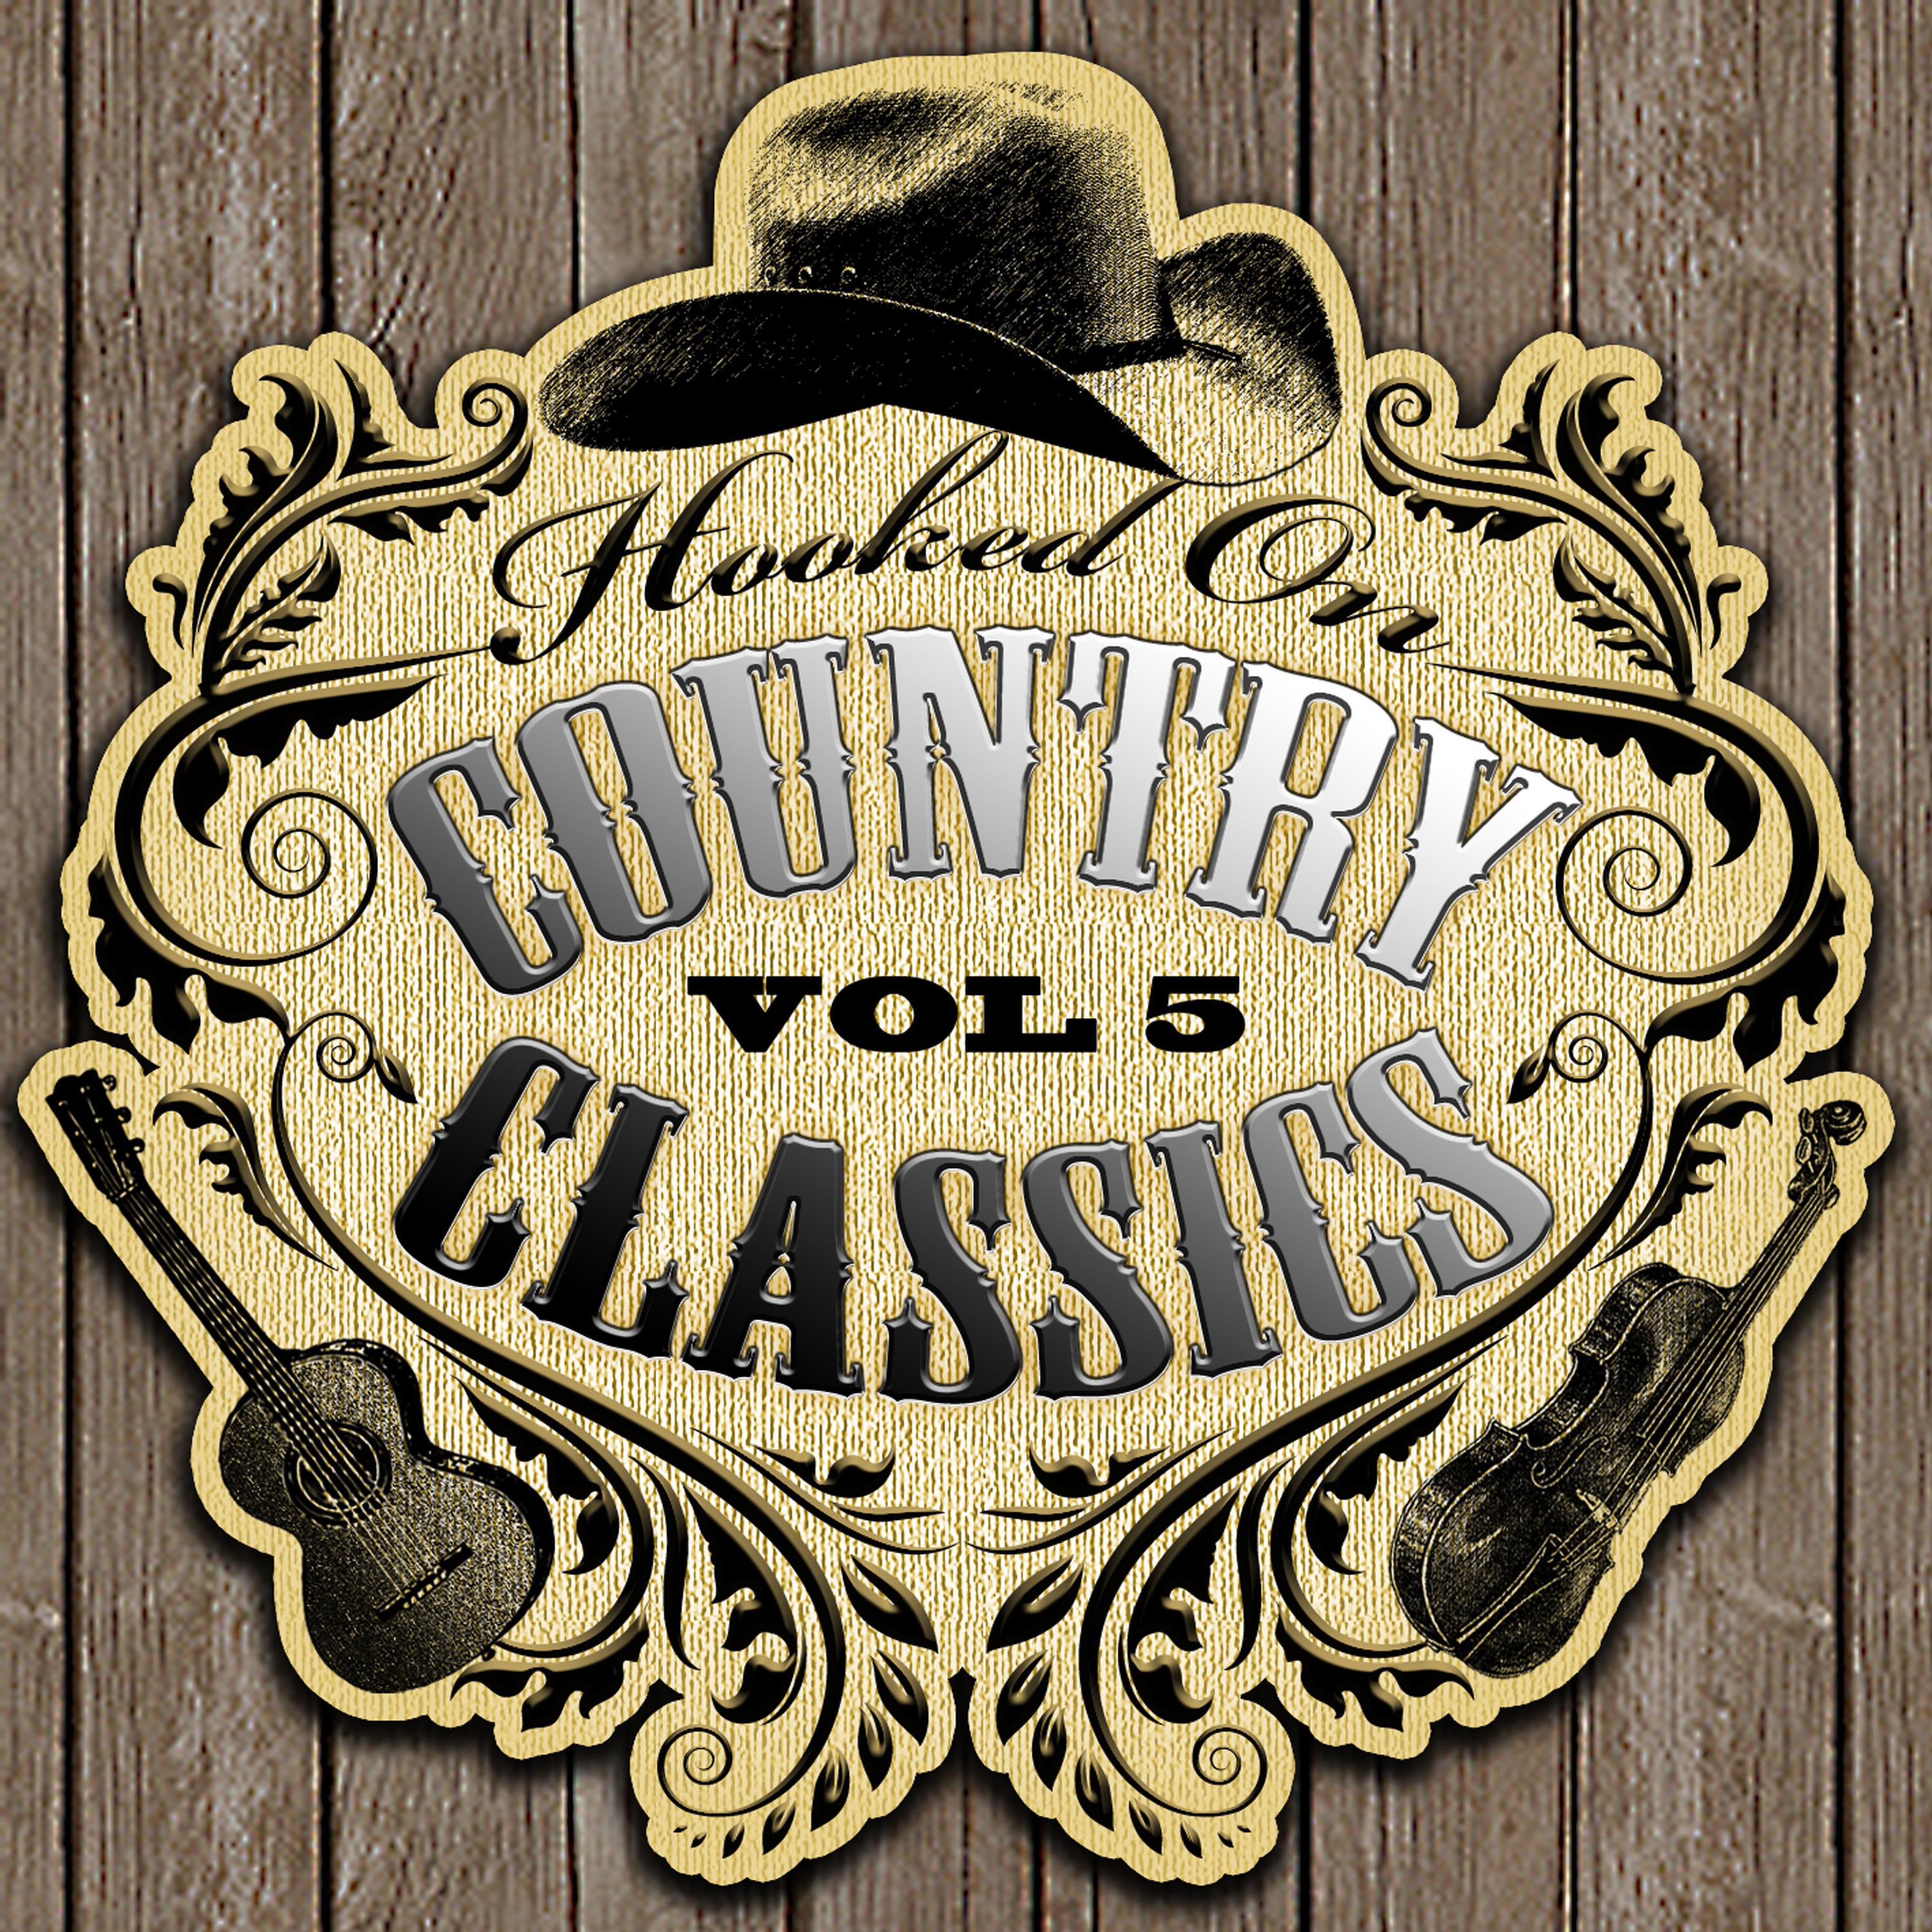 Hooked On Country Classics, Vol. 5